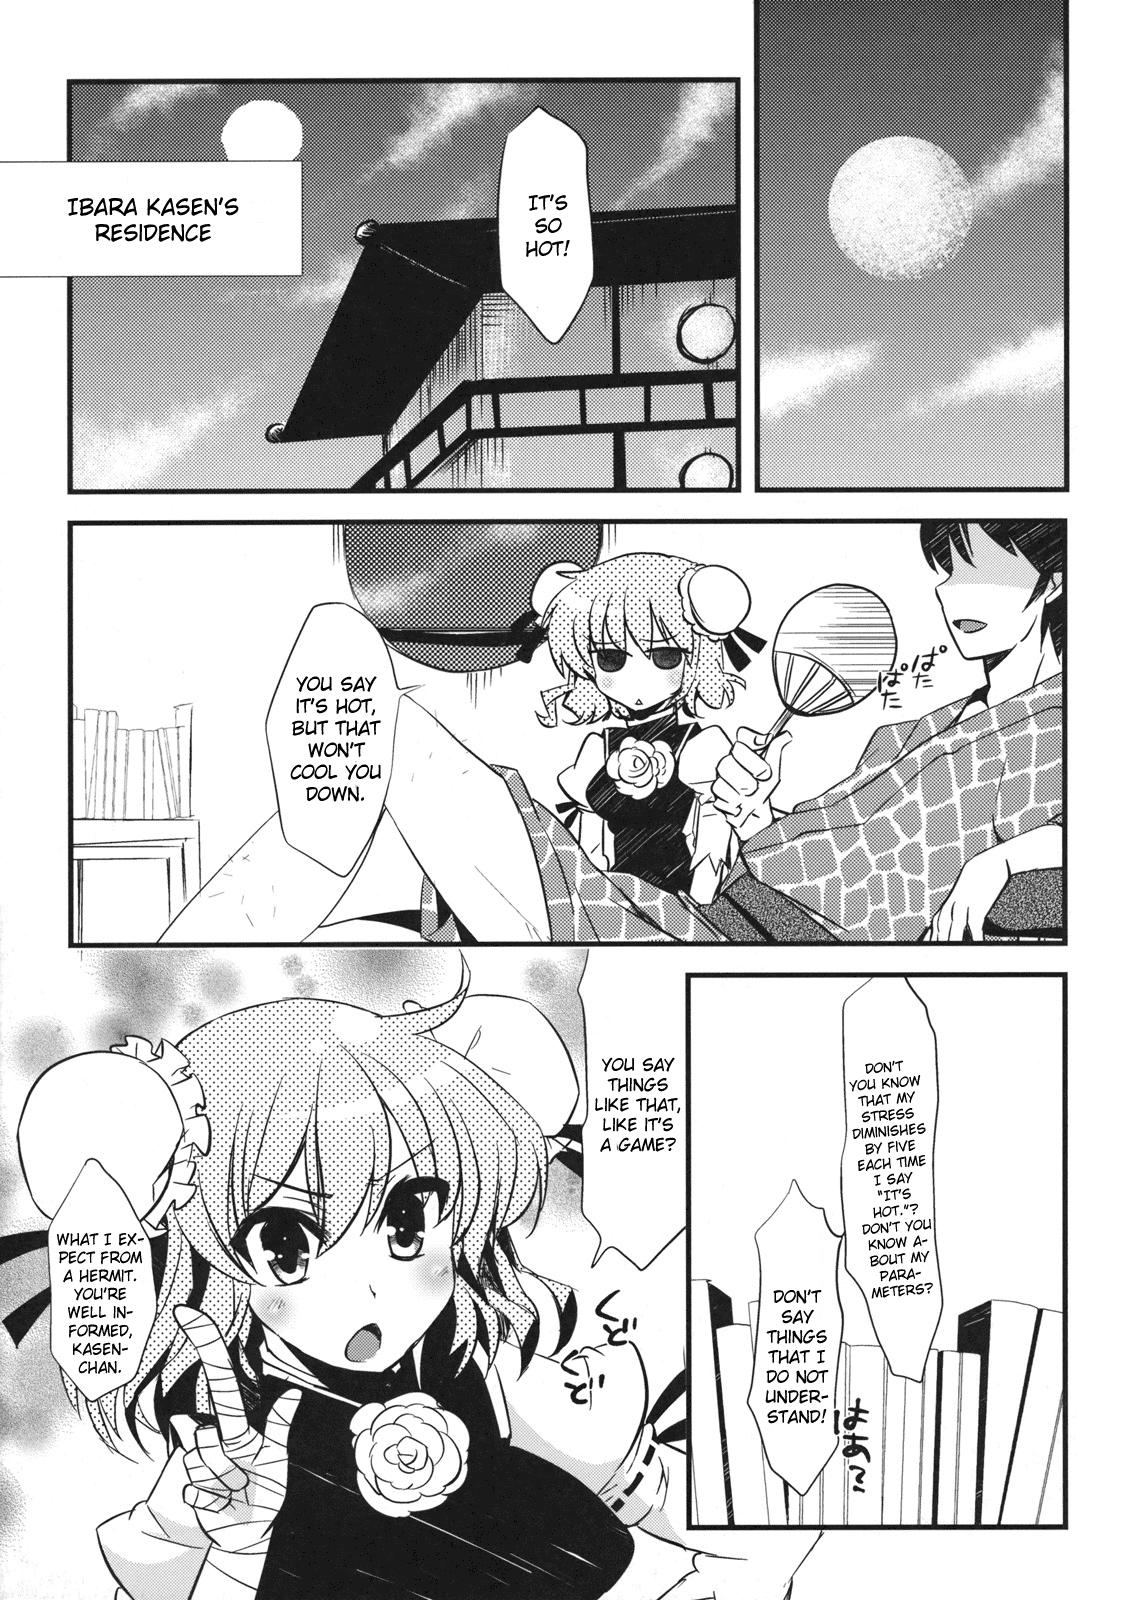 Tribbing Kasenppai! - Touhou project Bathroom - Page 5